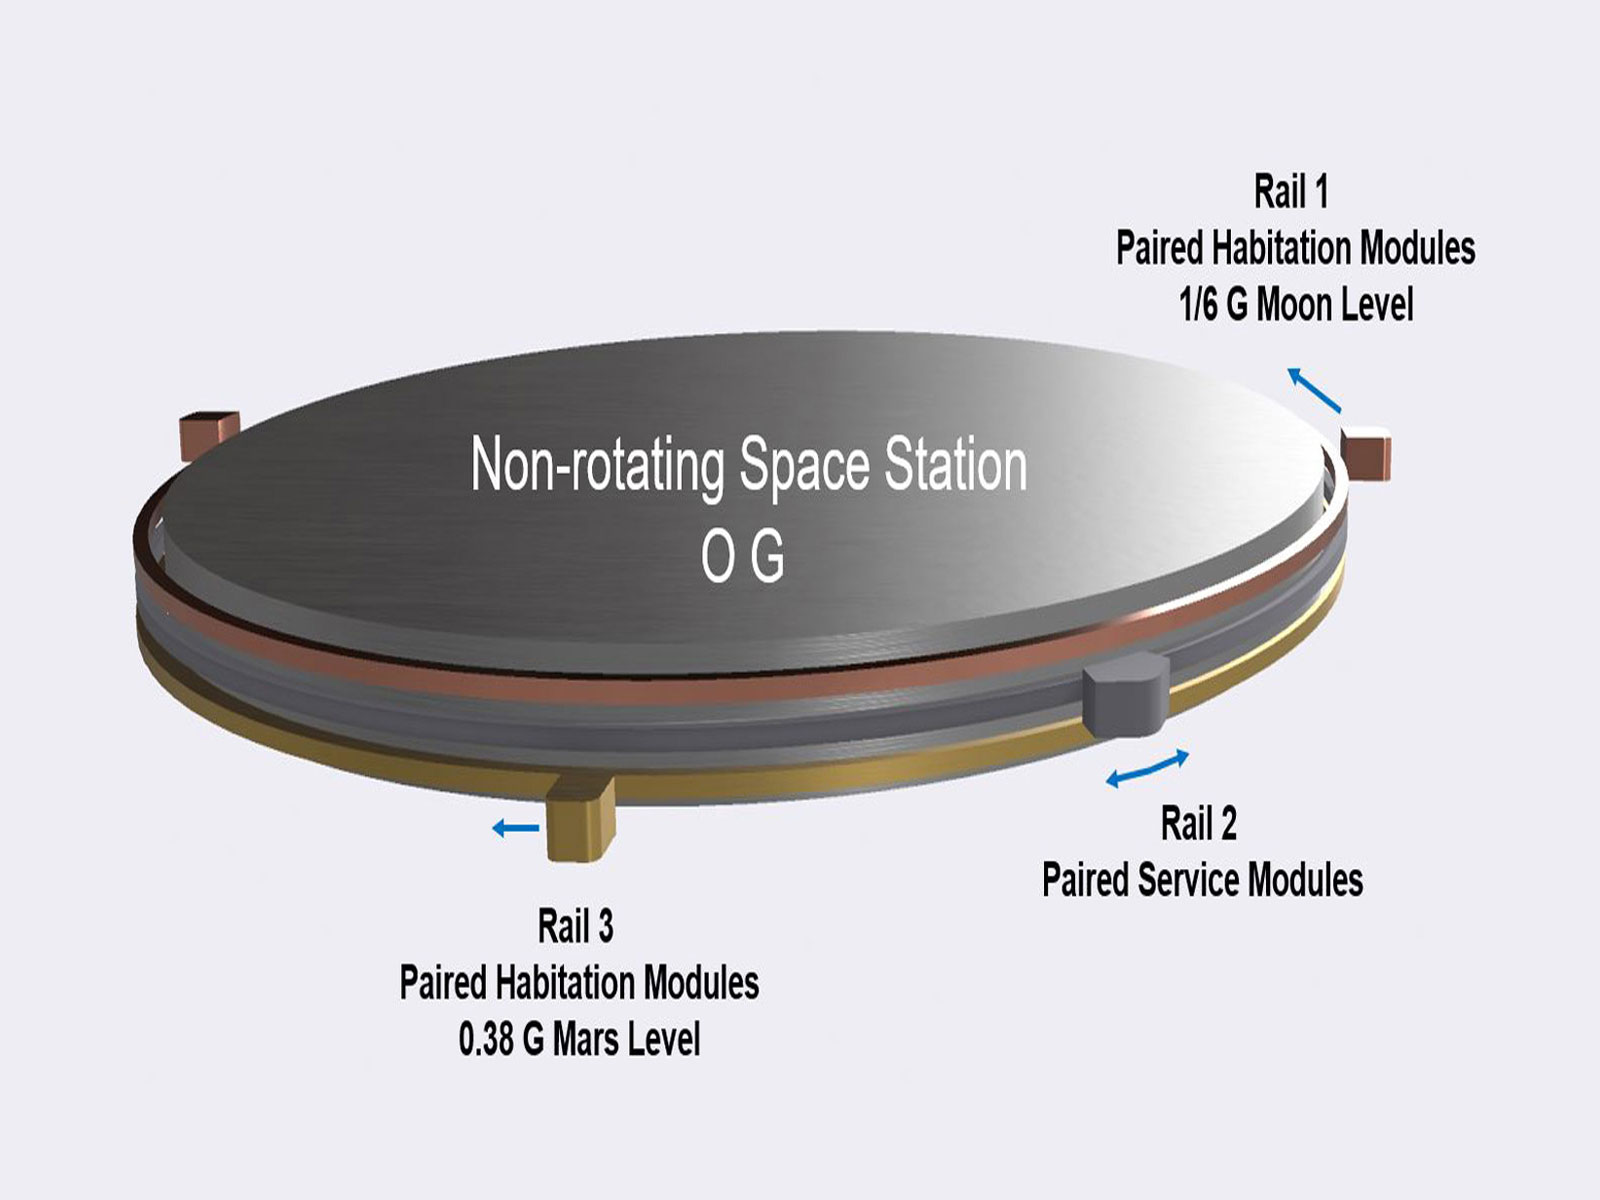 Illustration of spacecraft capable of generating artificial gravity environments